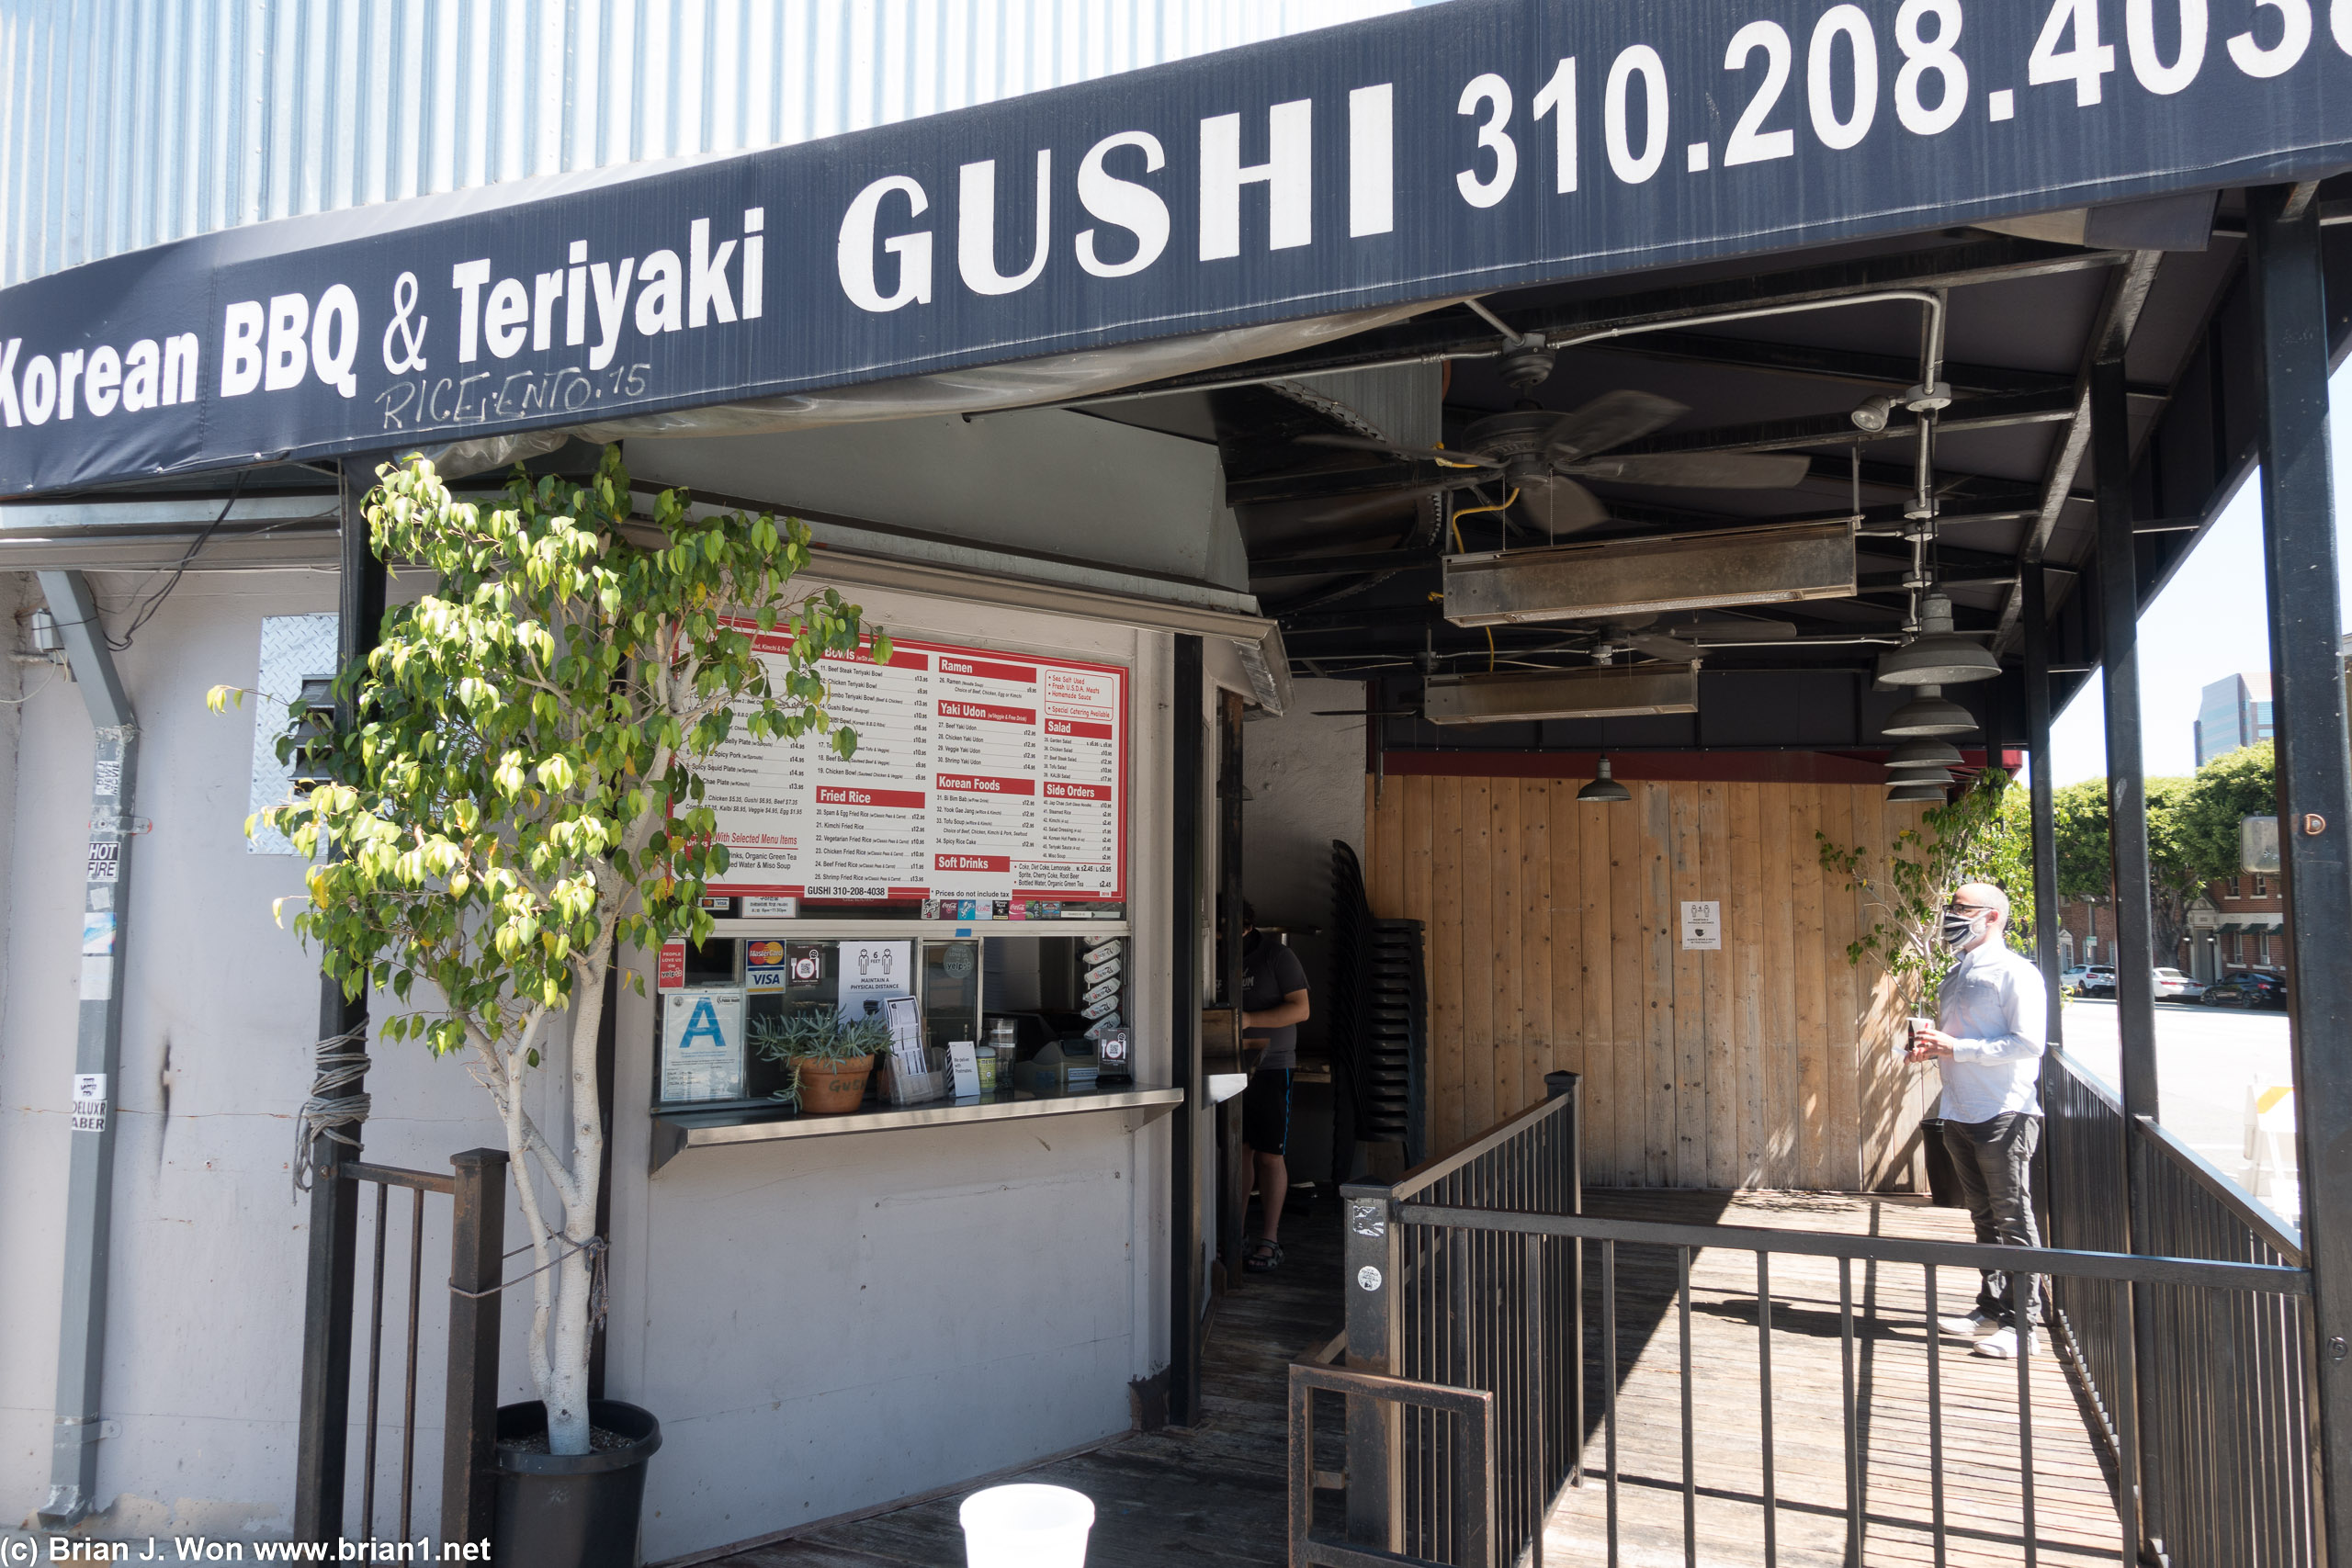 Gushi is still open, too.